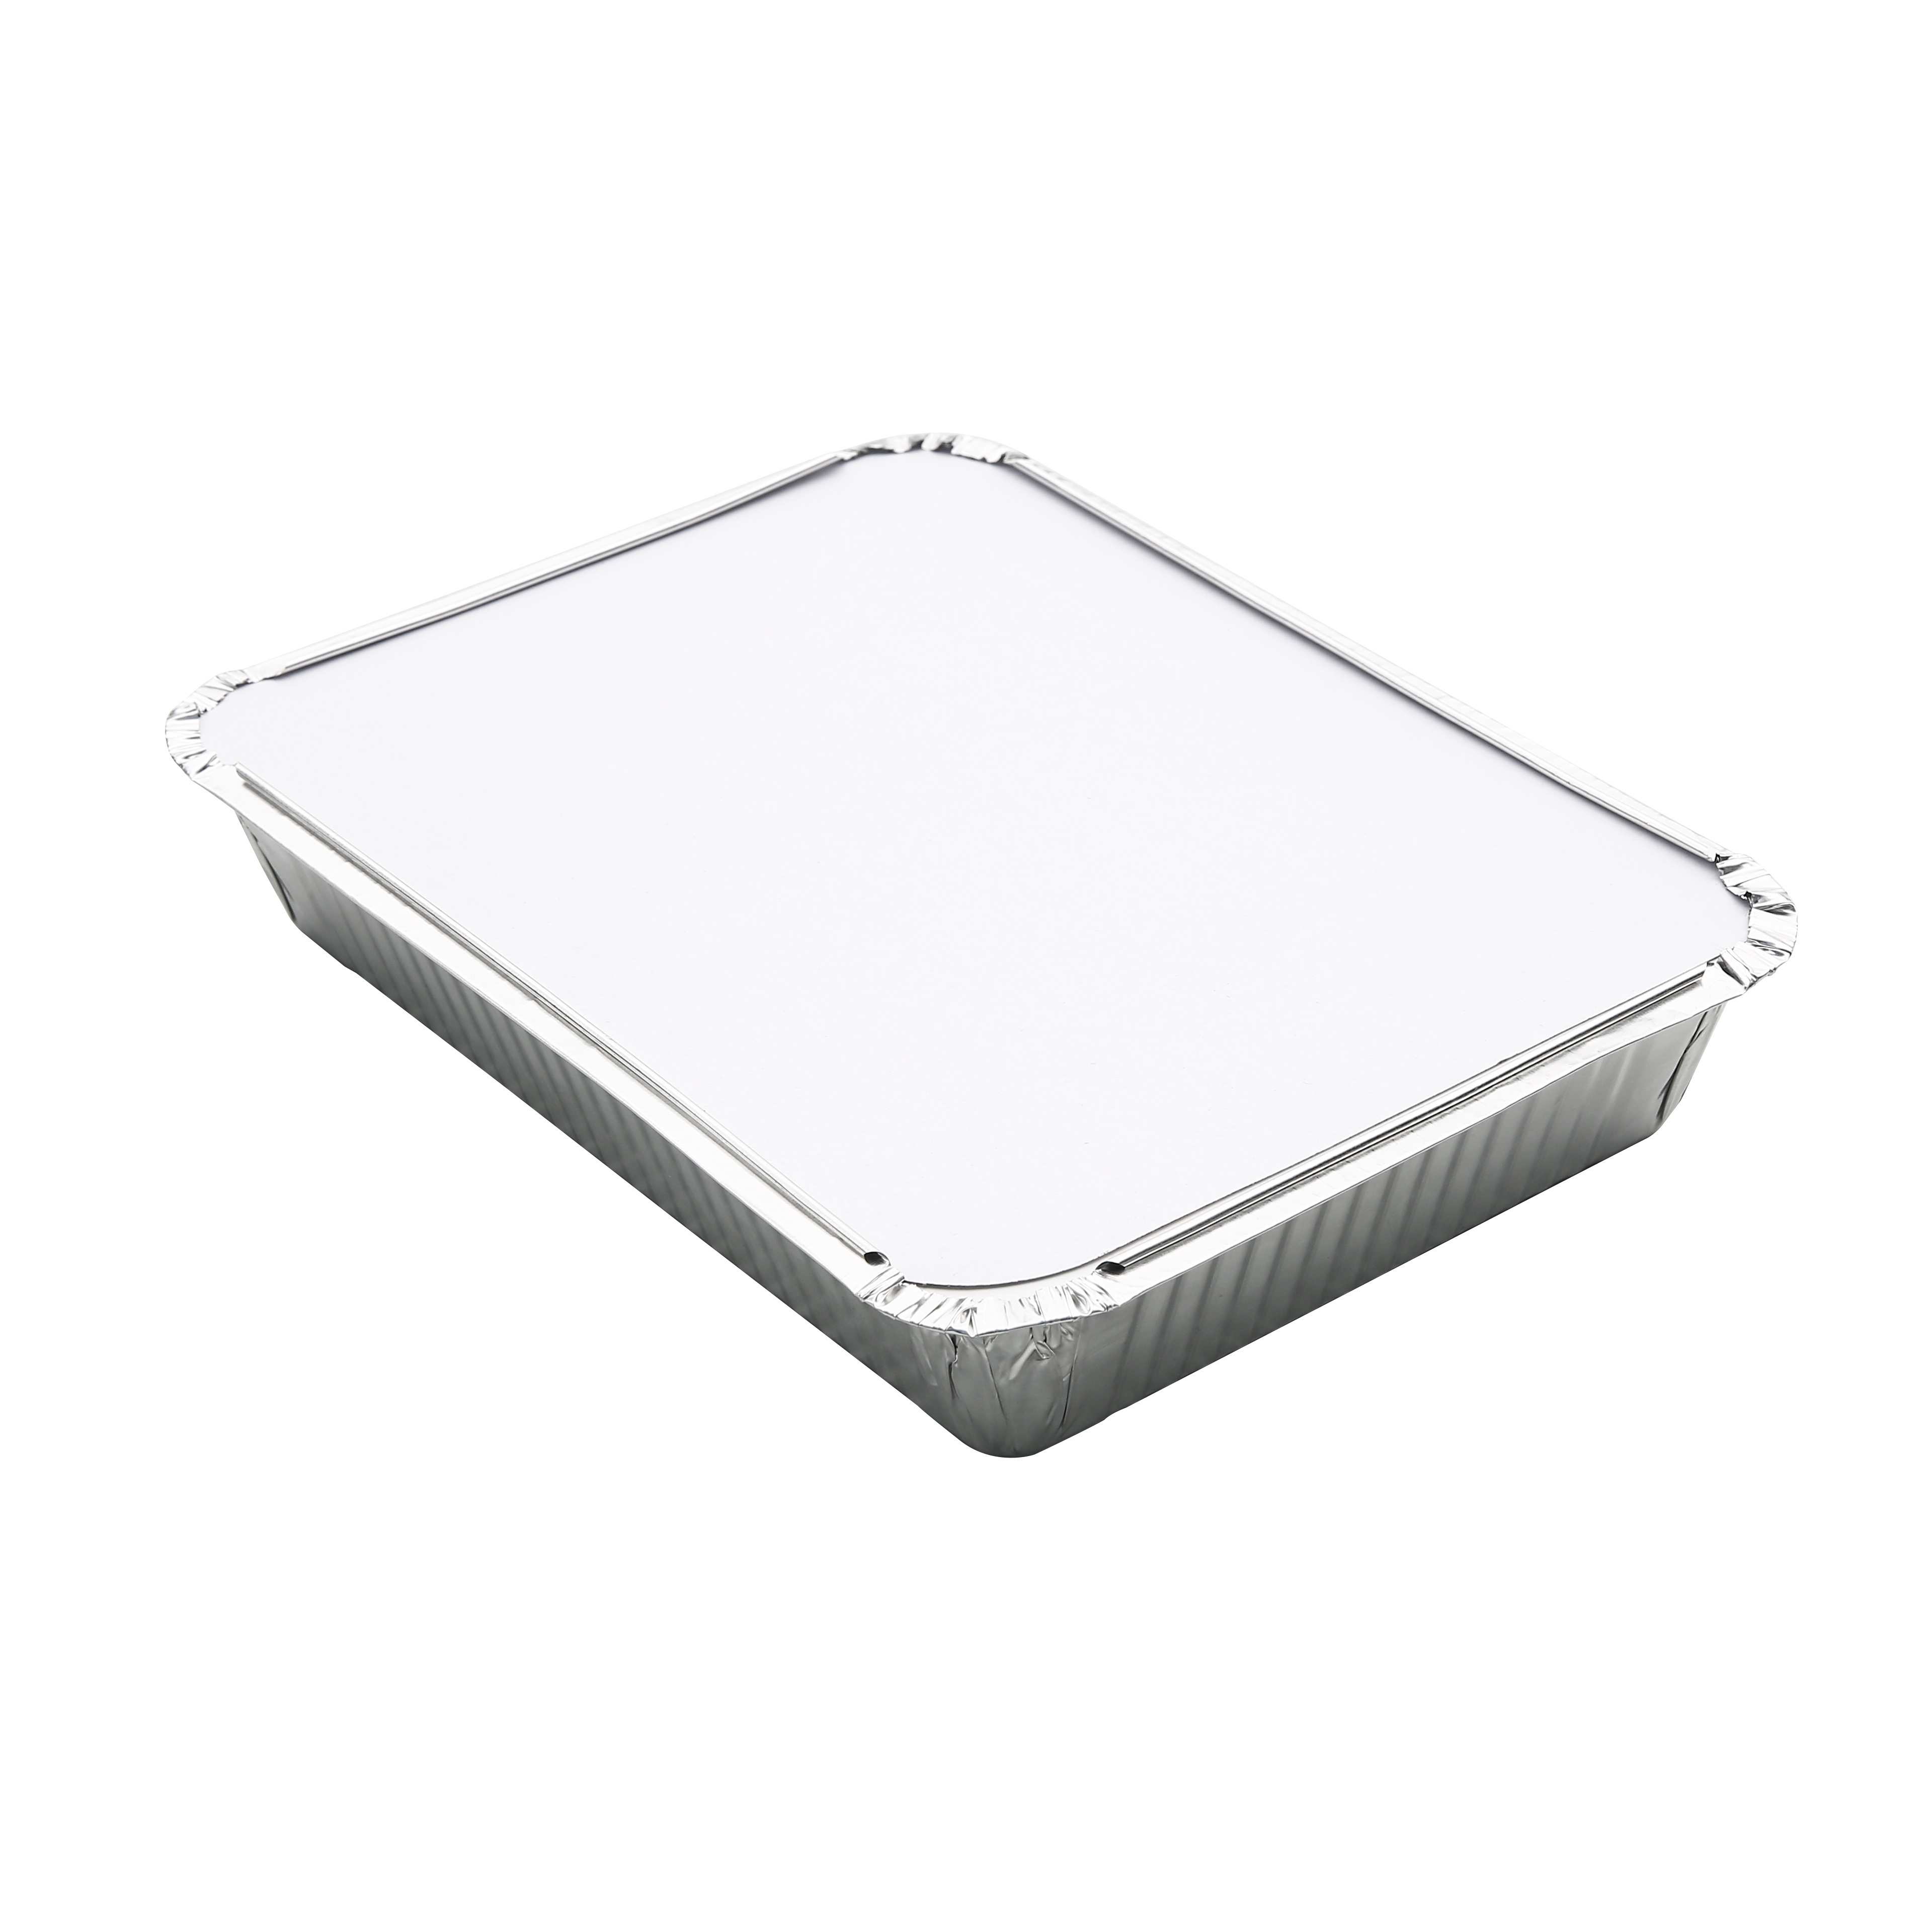 16 x 11 Oblong Cookie Sheet Disposable Aluminum Foil Baking Pan Trays  (Pack of 20)